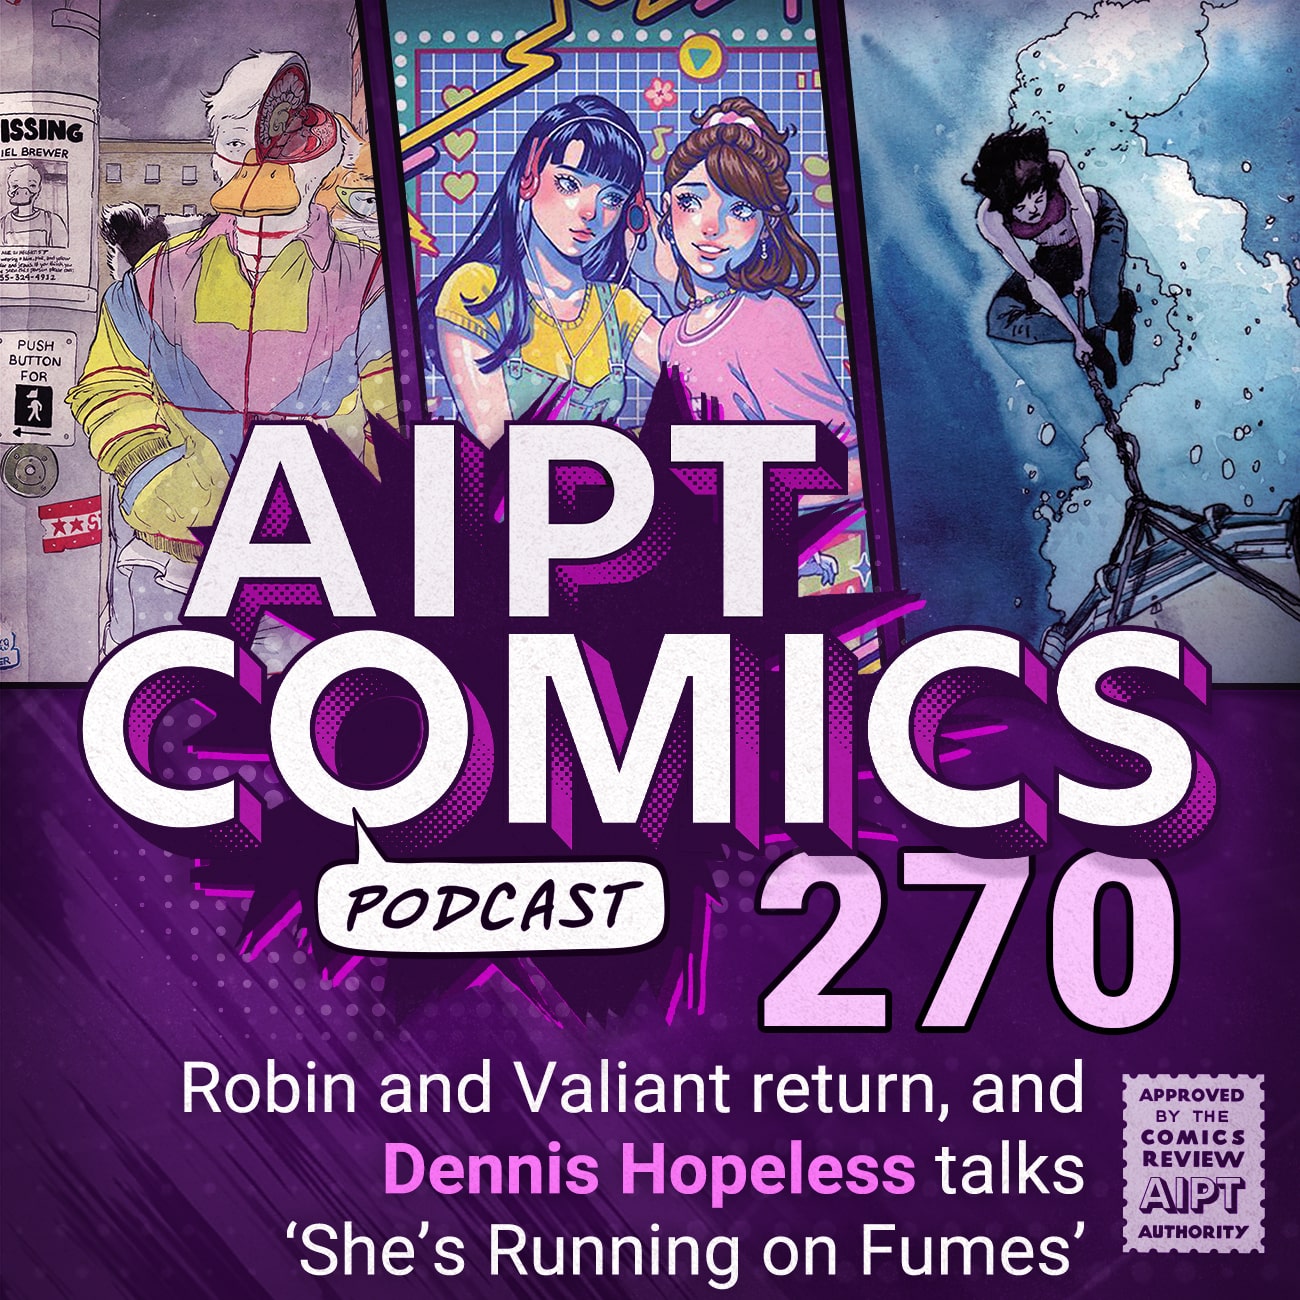 AIPT Comics Podcast Episode 270: Robin and Valiant return, and Dennis Hopeless talks 'She's Running on Fumes'